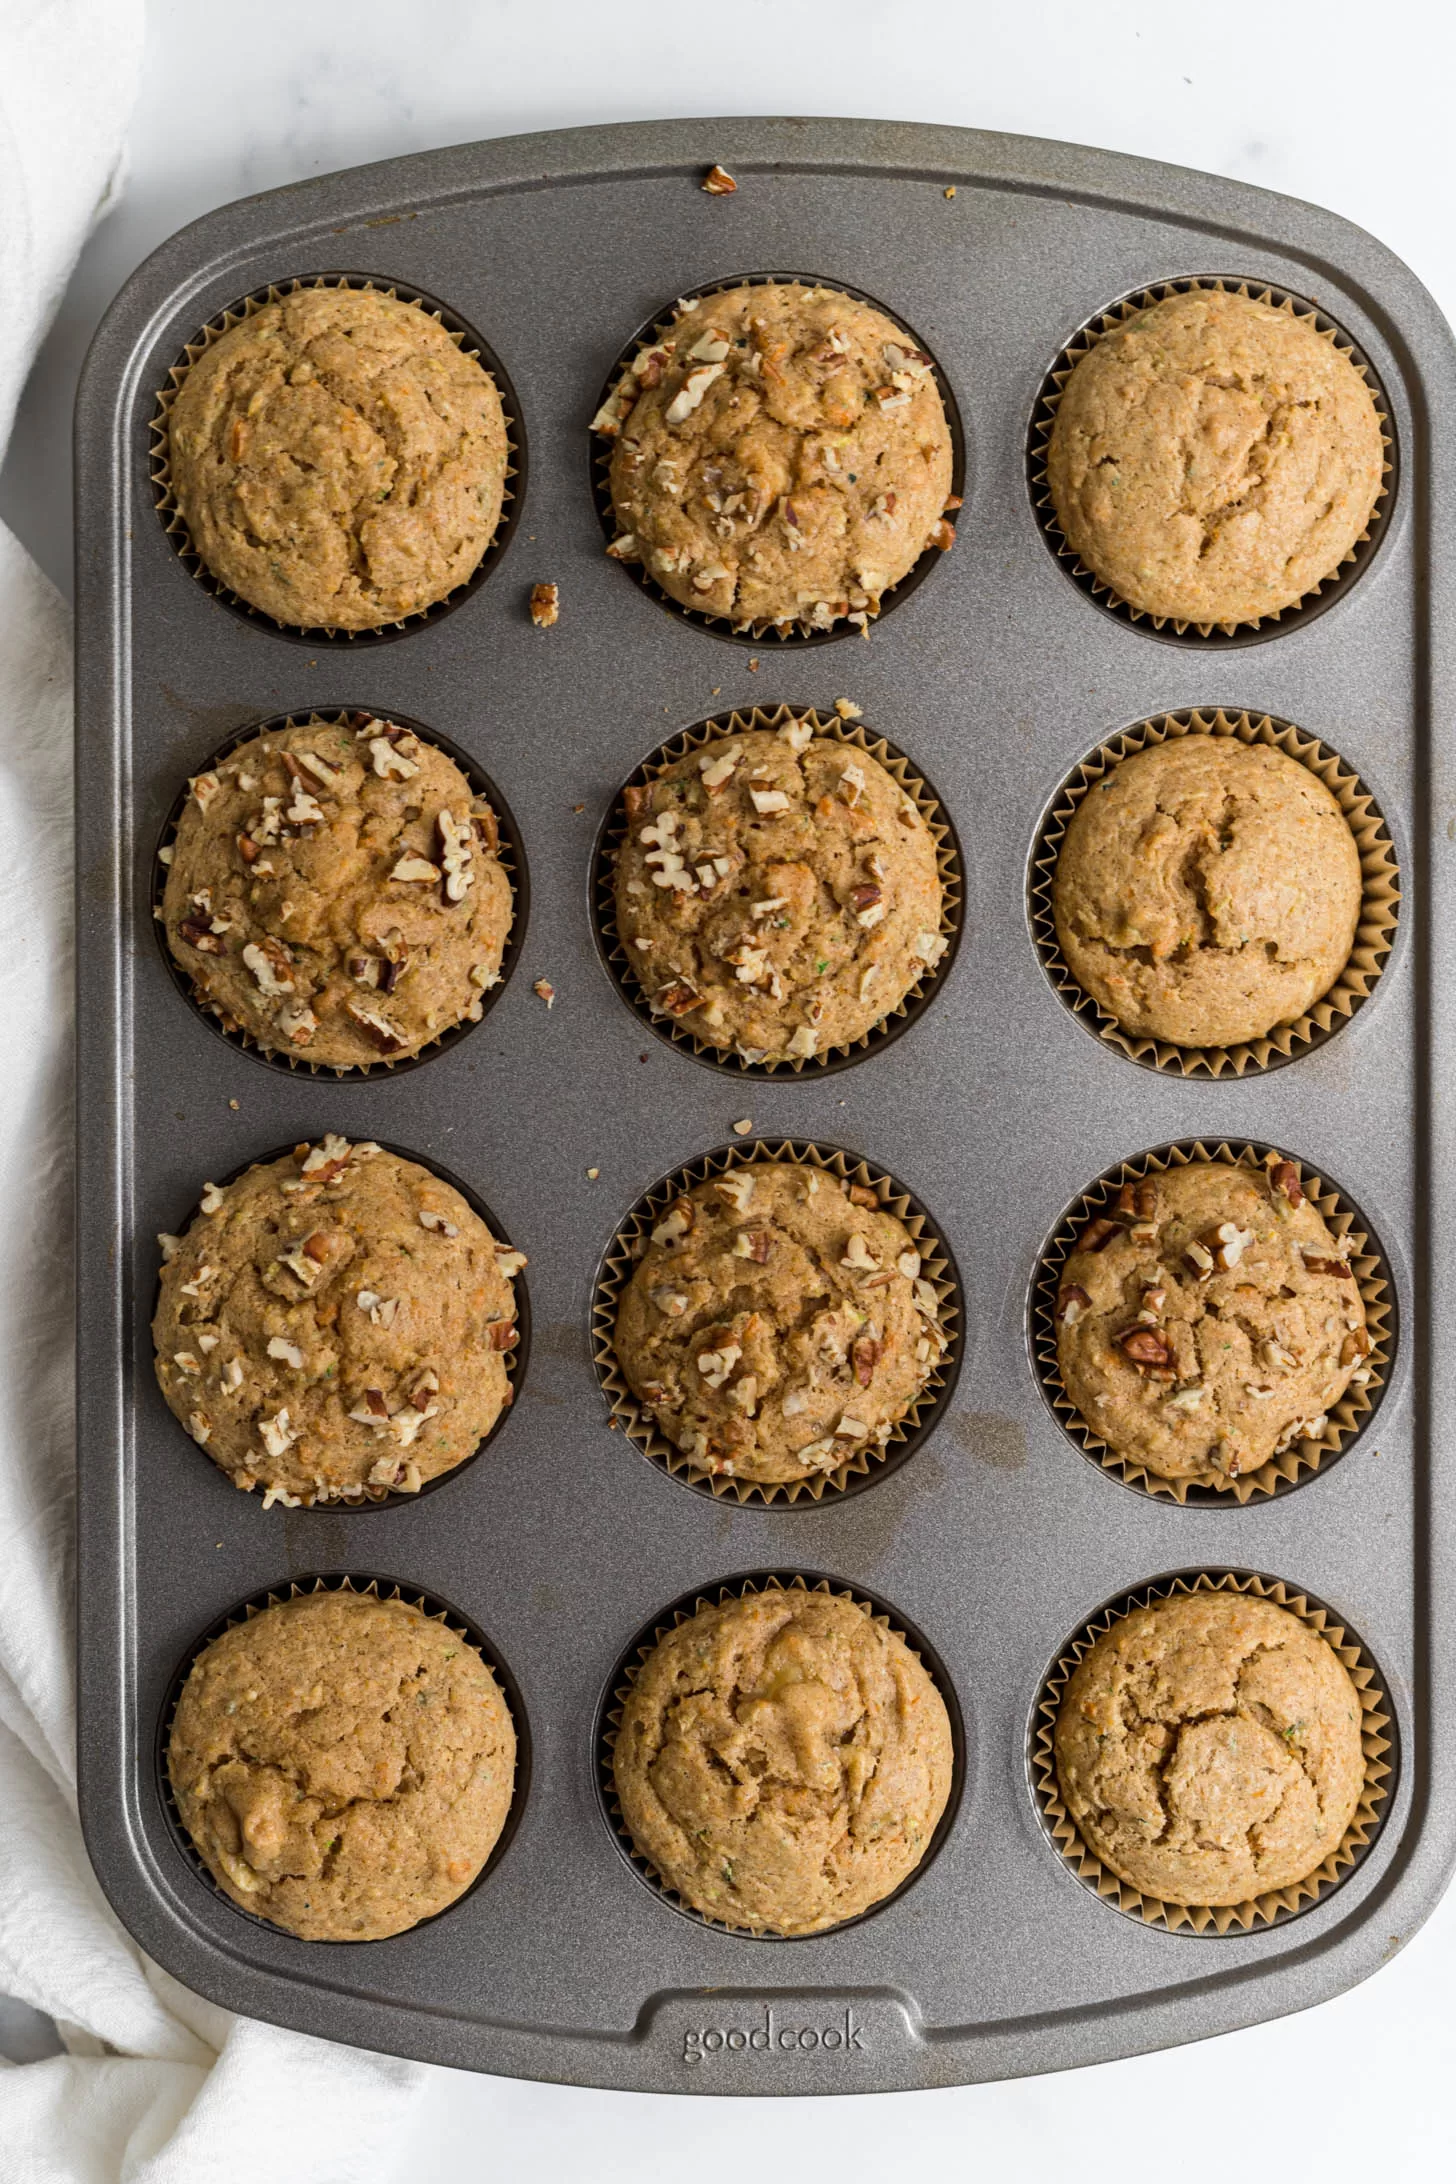 Cooked muffins in a muffin tin.